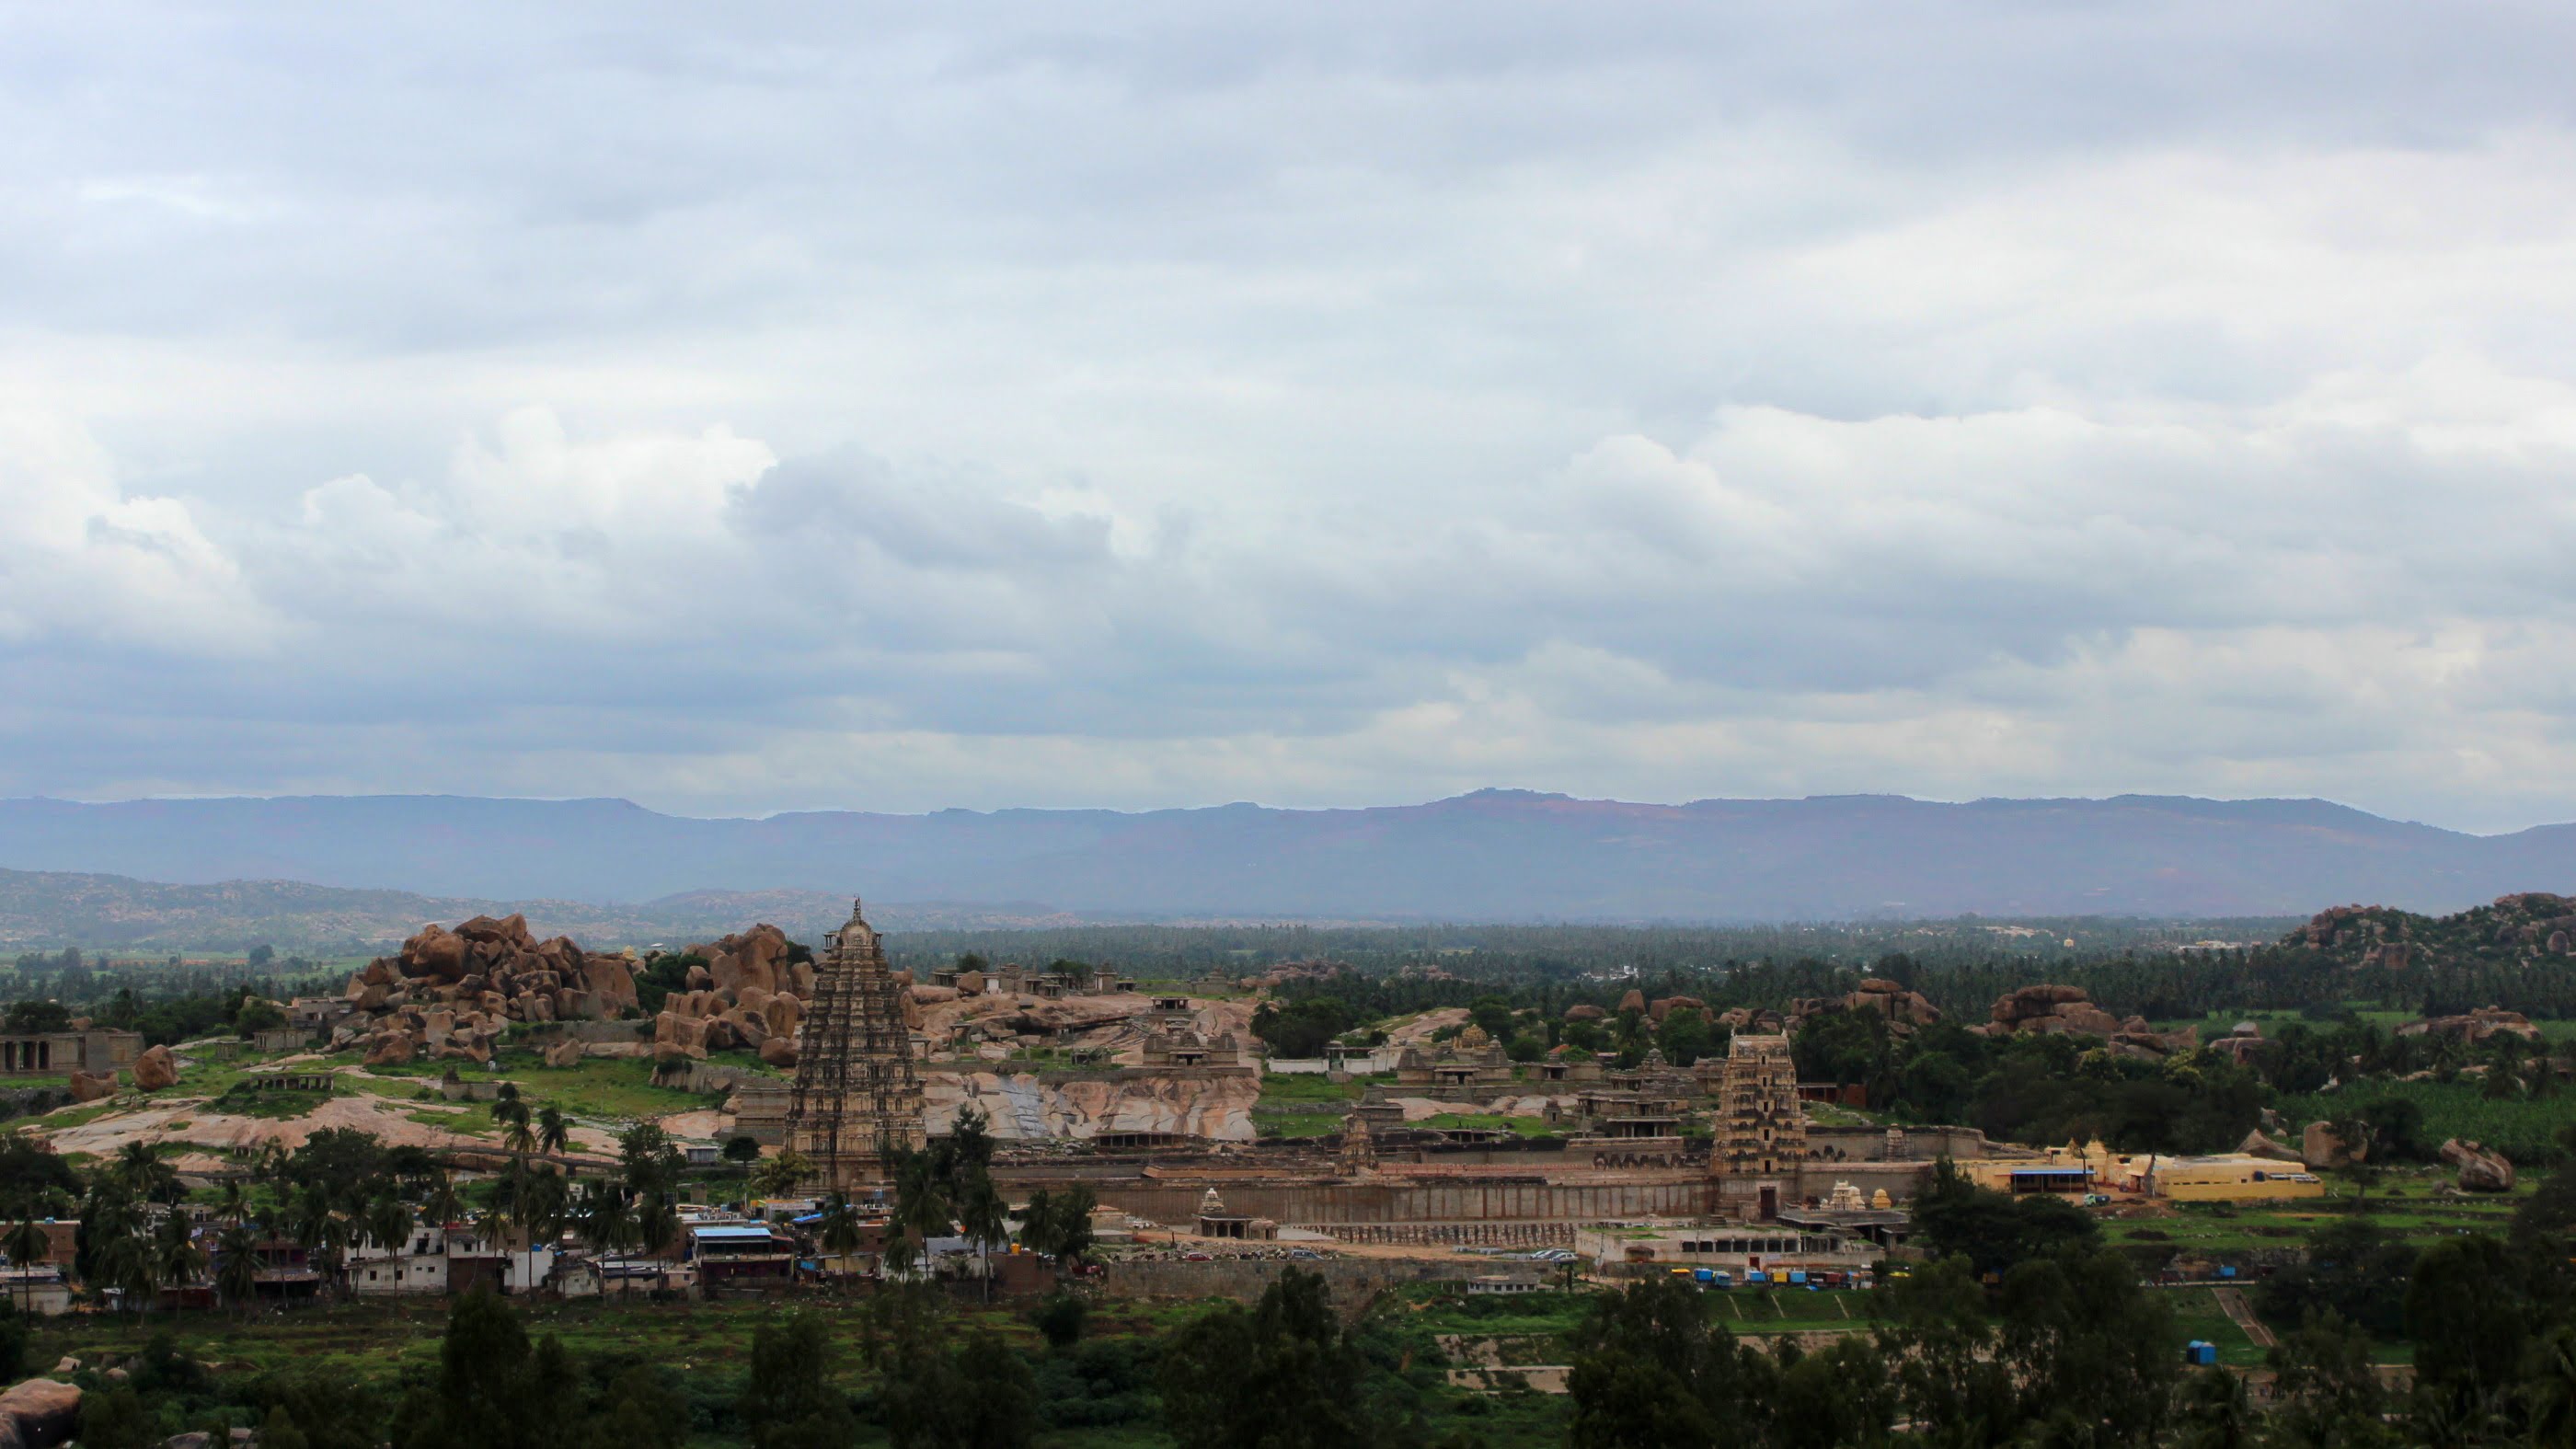 The view to Hampi from a hilltop in Virupapur Gaddi.